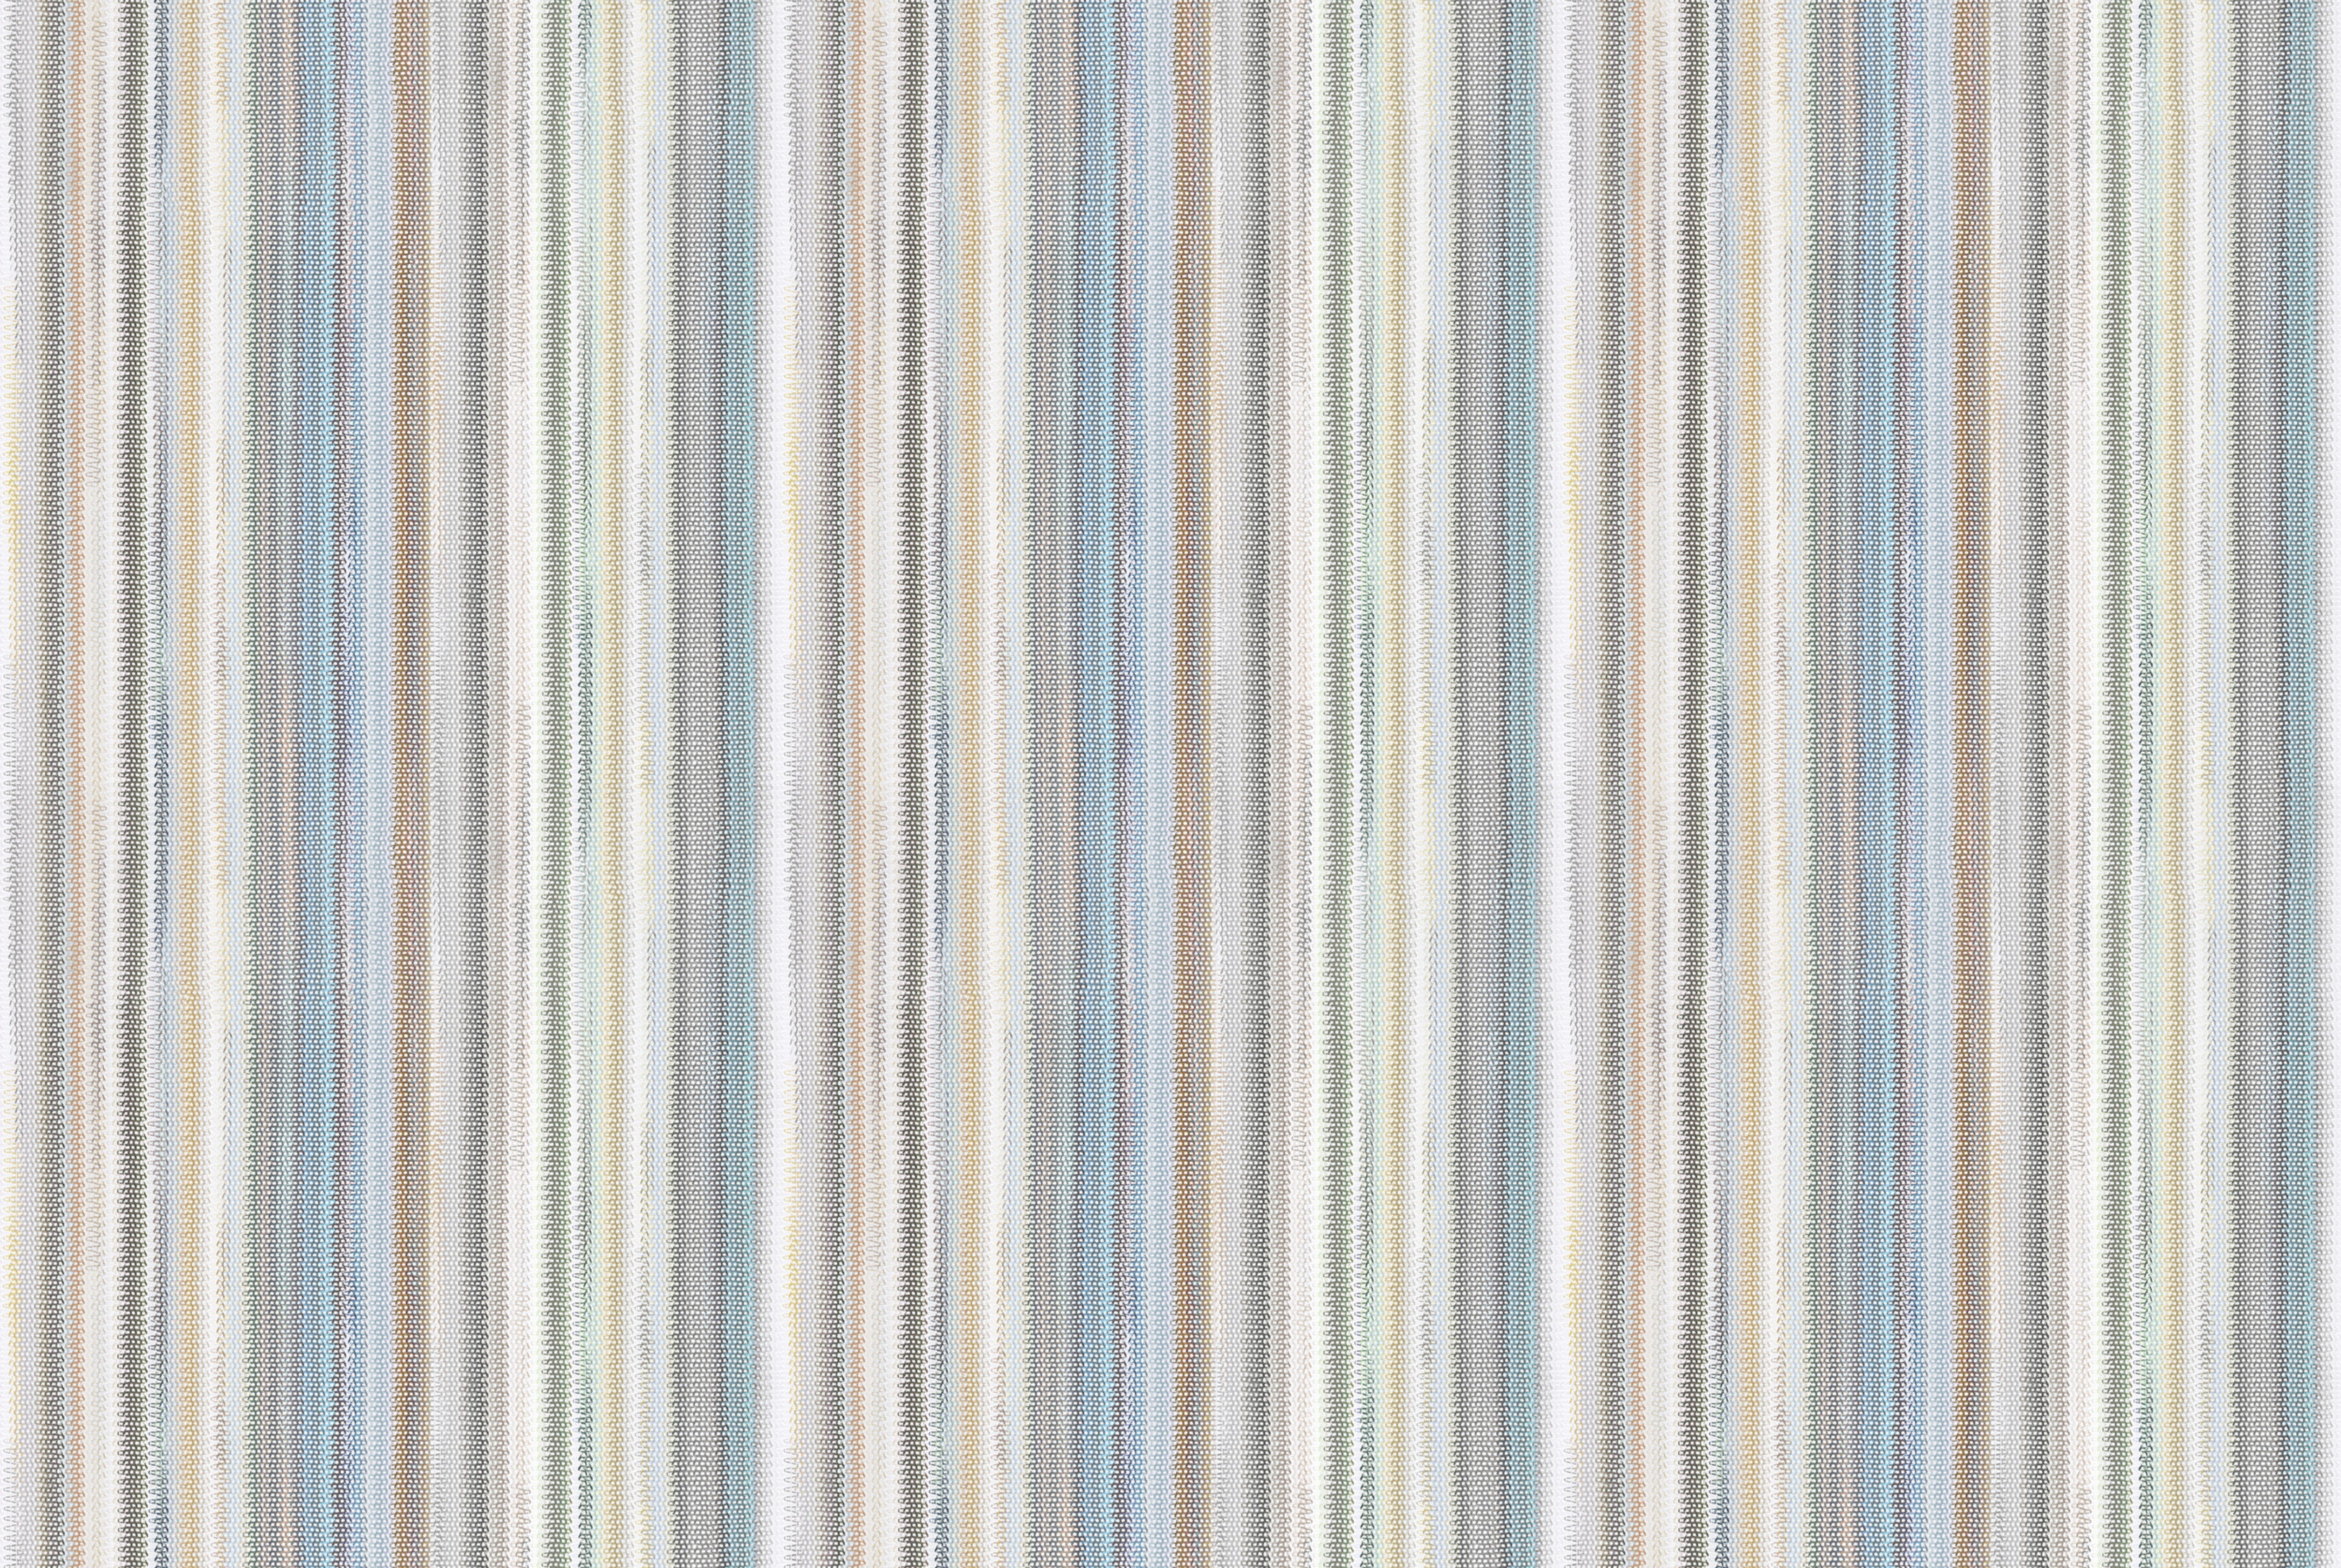 Missoni Home Wallcoverings 04 Striped Sunset 10395